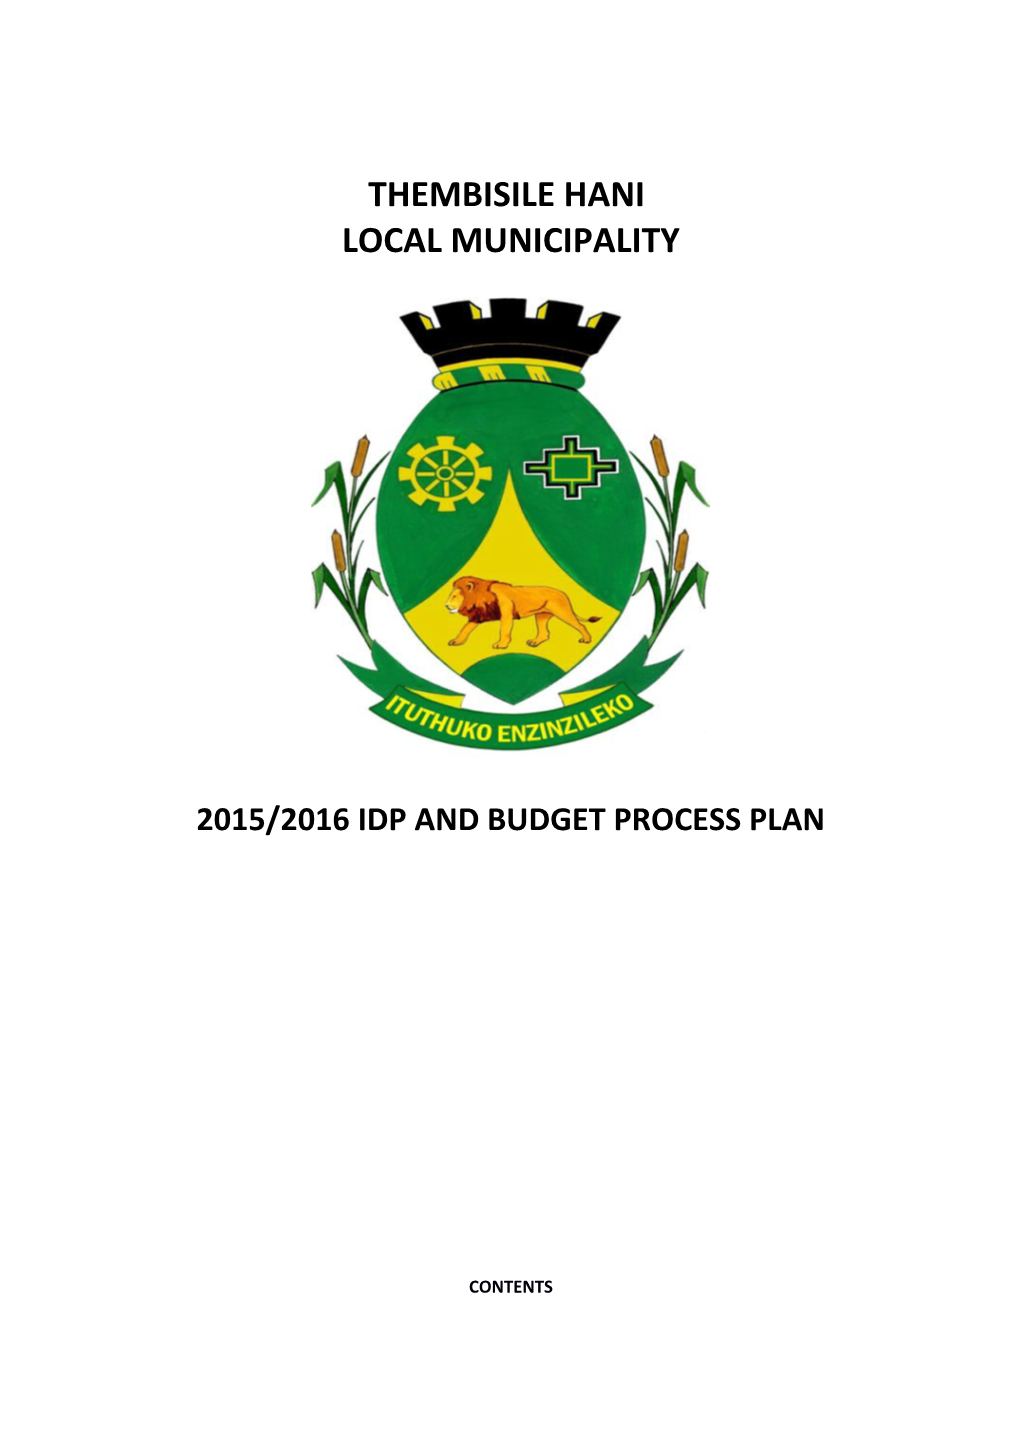 Thembisile Hani Local Municipality Process Plan for The2015